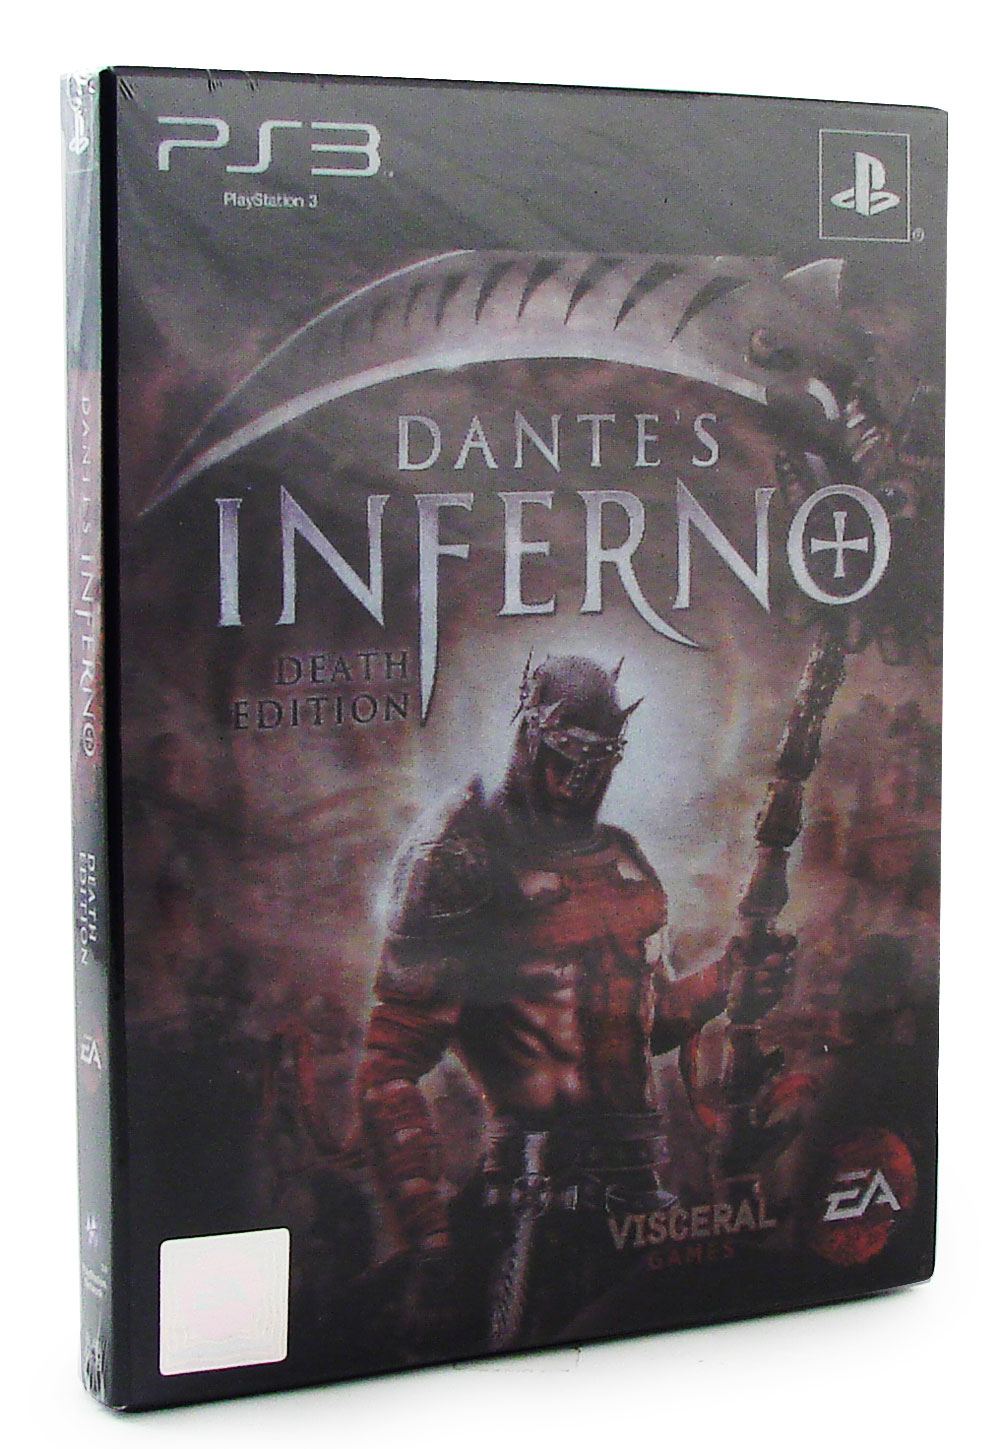 Dante's Inferno - Divine Edition (Sony PlayStation 3, 2010) for